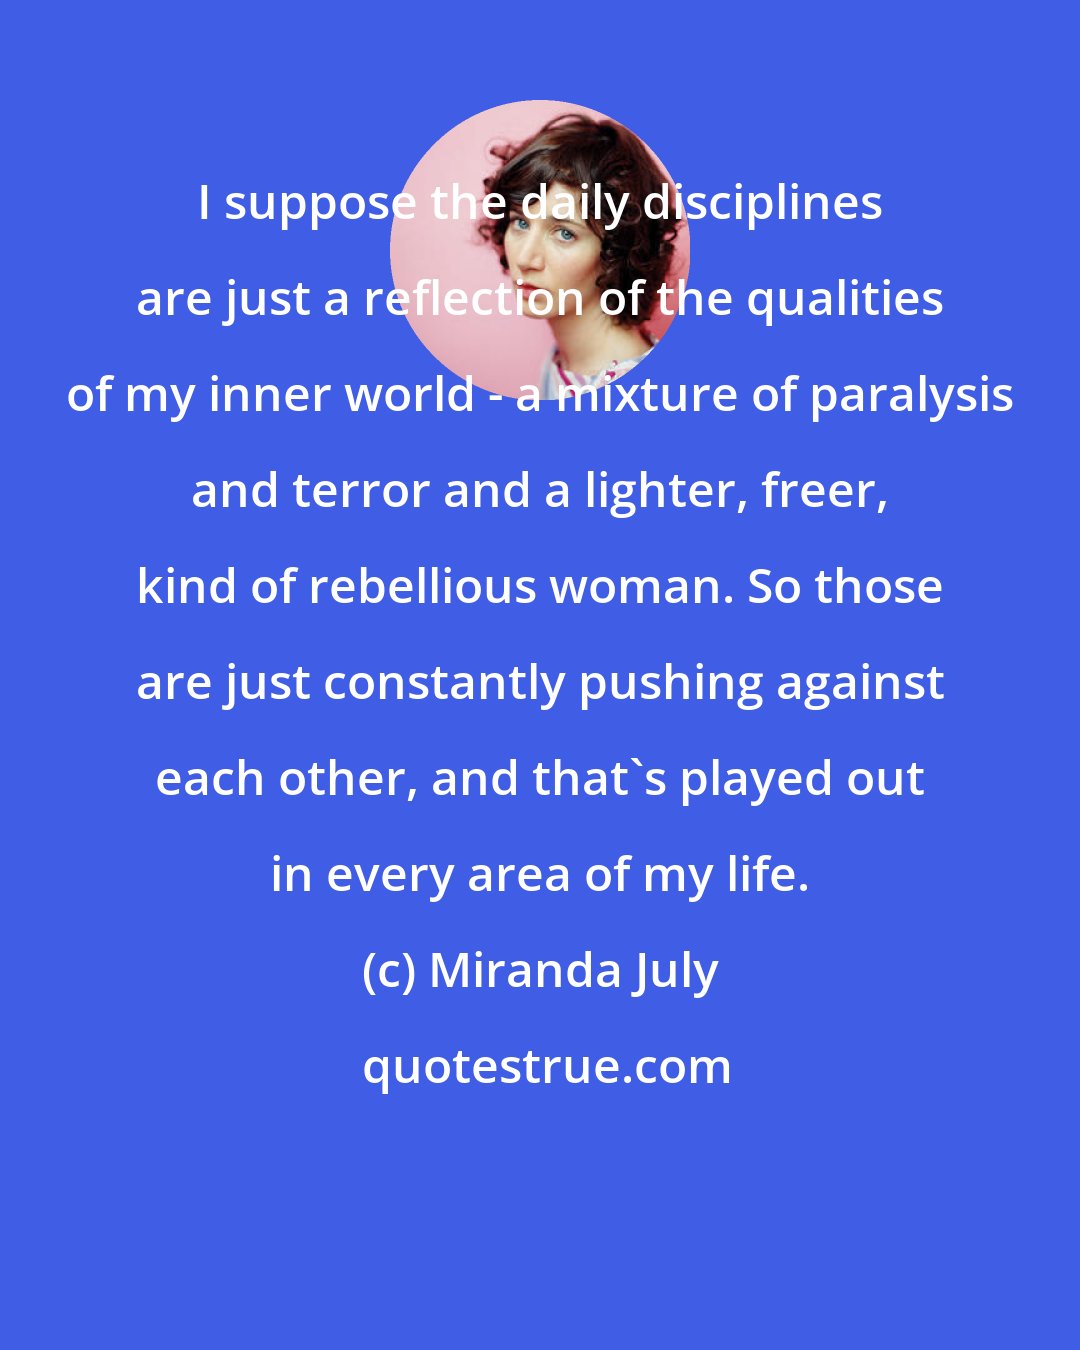 Miranda July: I suppose the daily disciplines are just a reflection of the qualities of my inner world - a mixture of paralysis and terror and a lighter, freer, kind of rebellious woman. So those are just constantly pushing against each other, and that's played out in every area of my life.